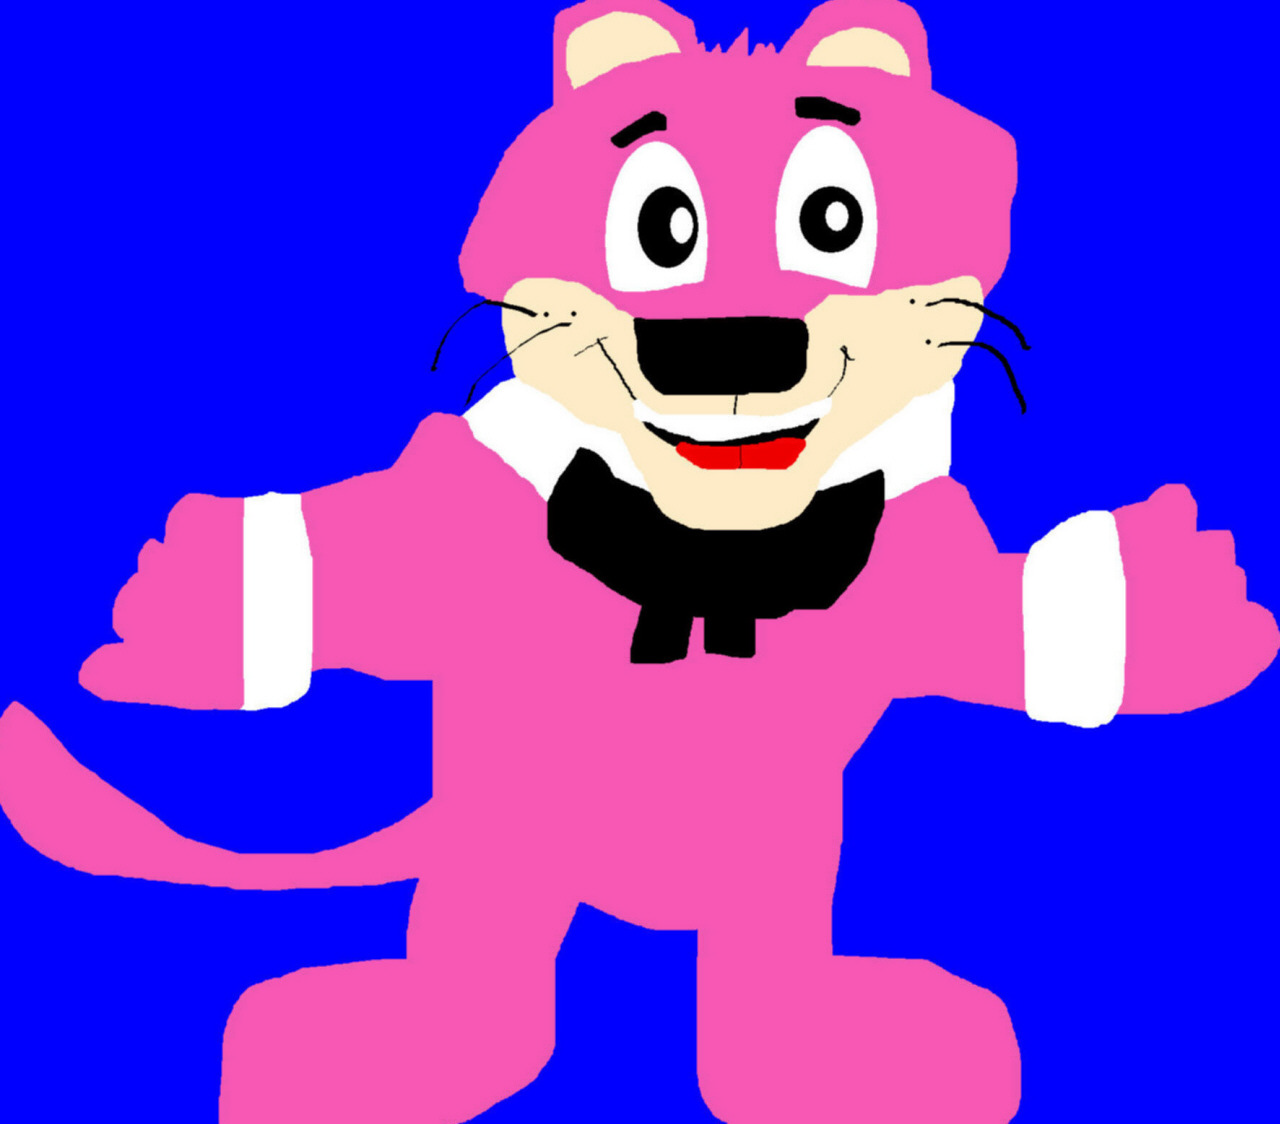 A Cute Snagglepuss Chibi New For 2015 MS Paint Ref Used by Falconlobo